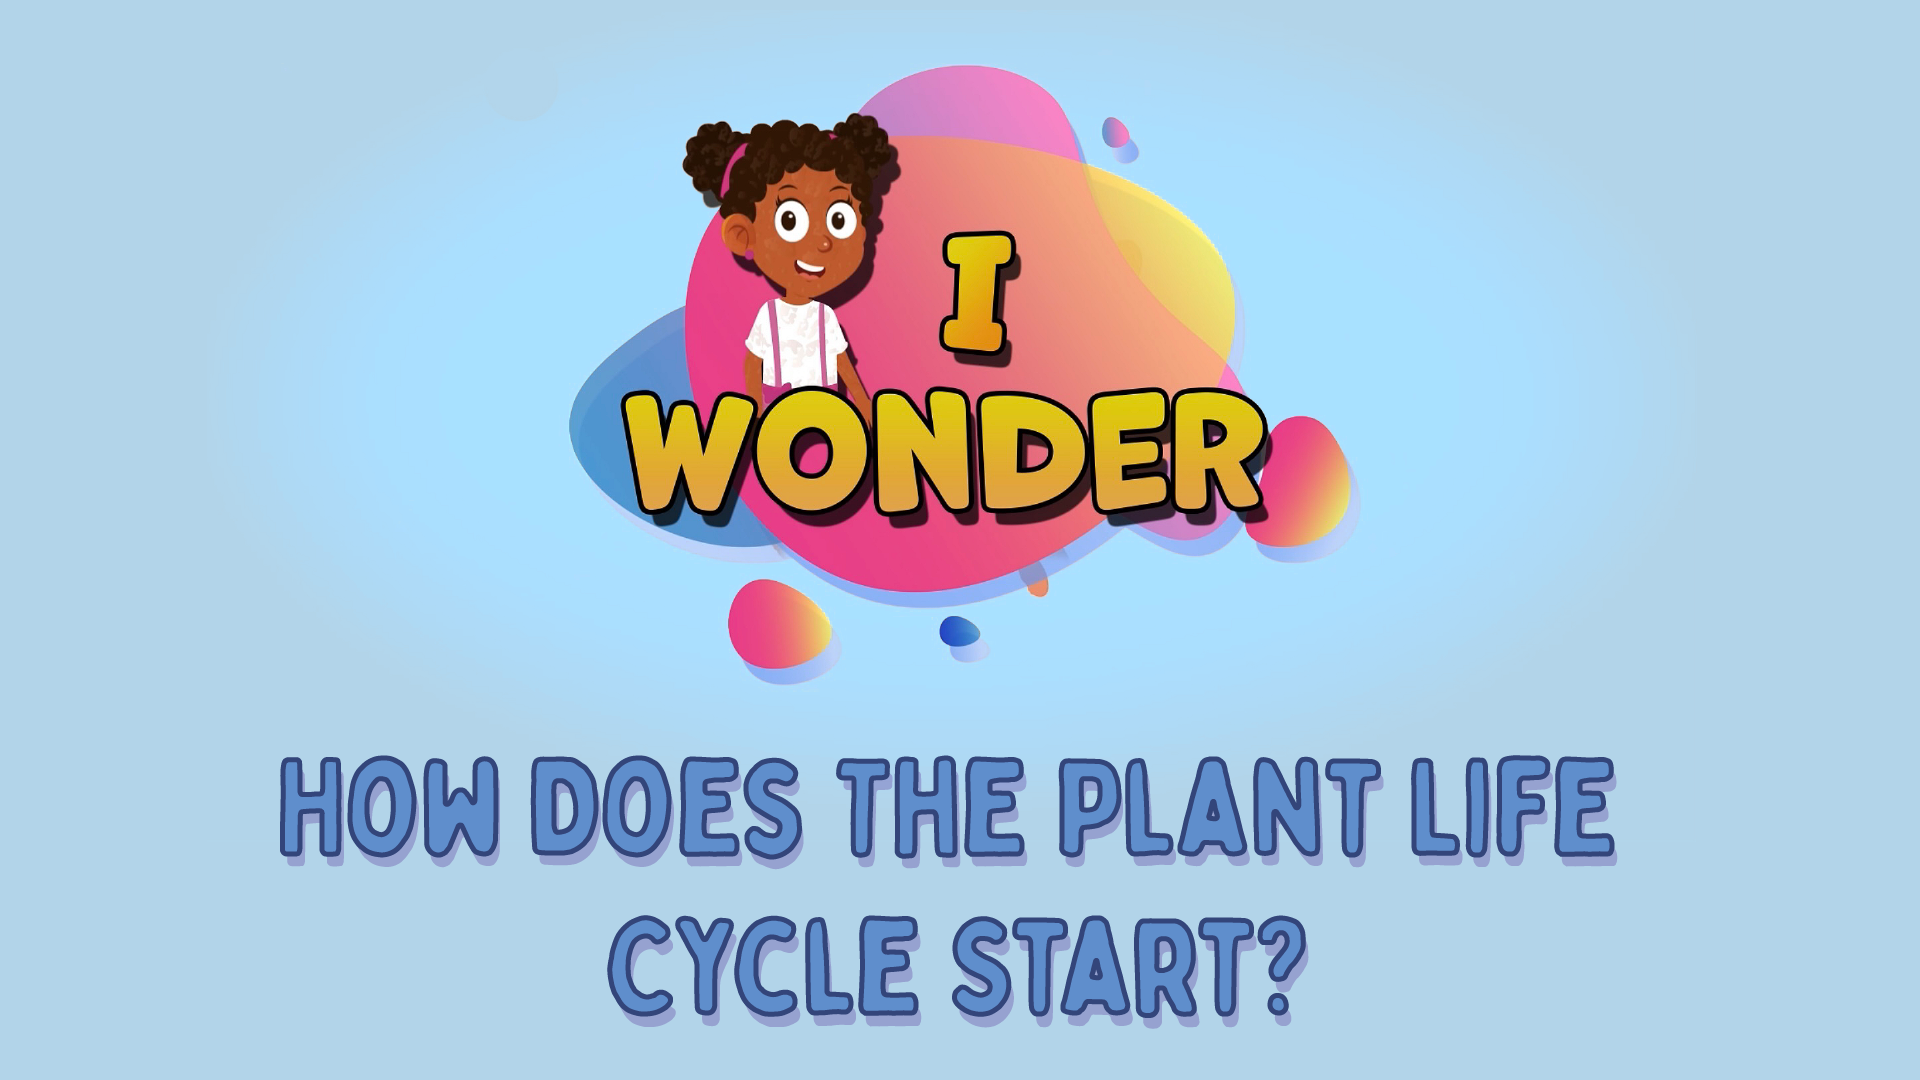 How Does The Plant Life Cycle Start?